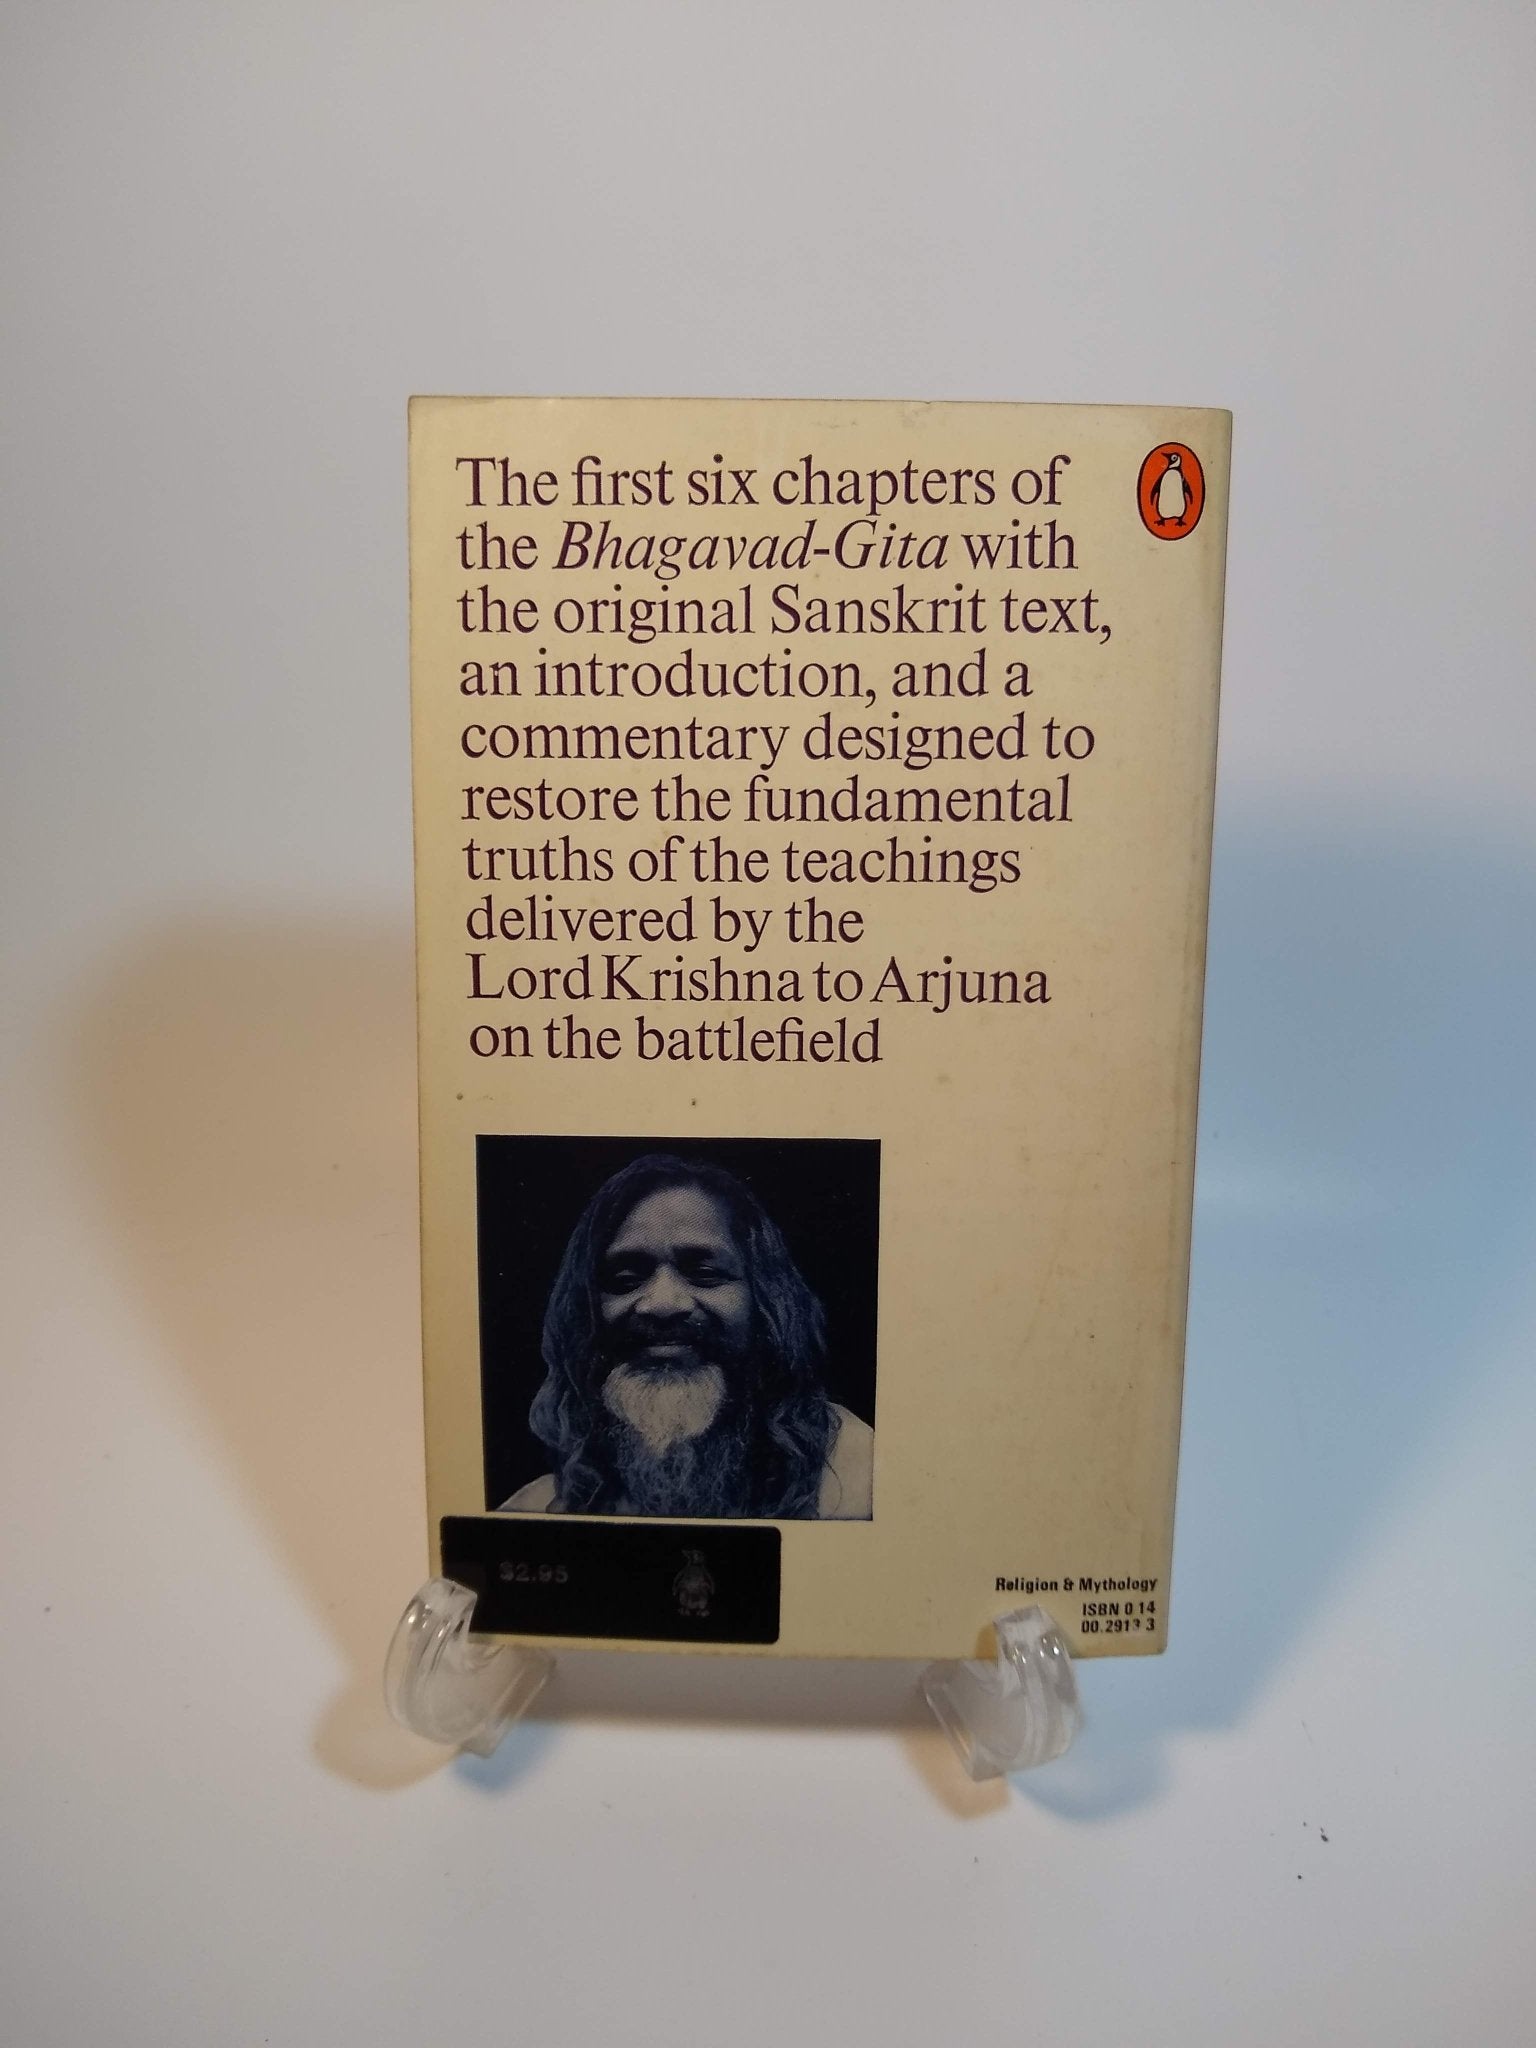 On The Bhagavad-Gita; A New Translation and Commentary; Chapters 1-6 - [ash-ling] Booksellers